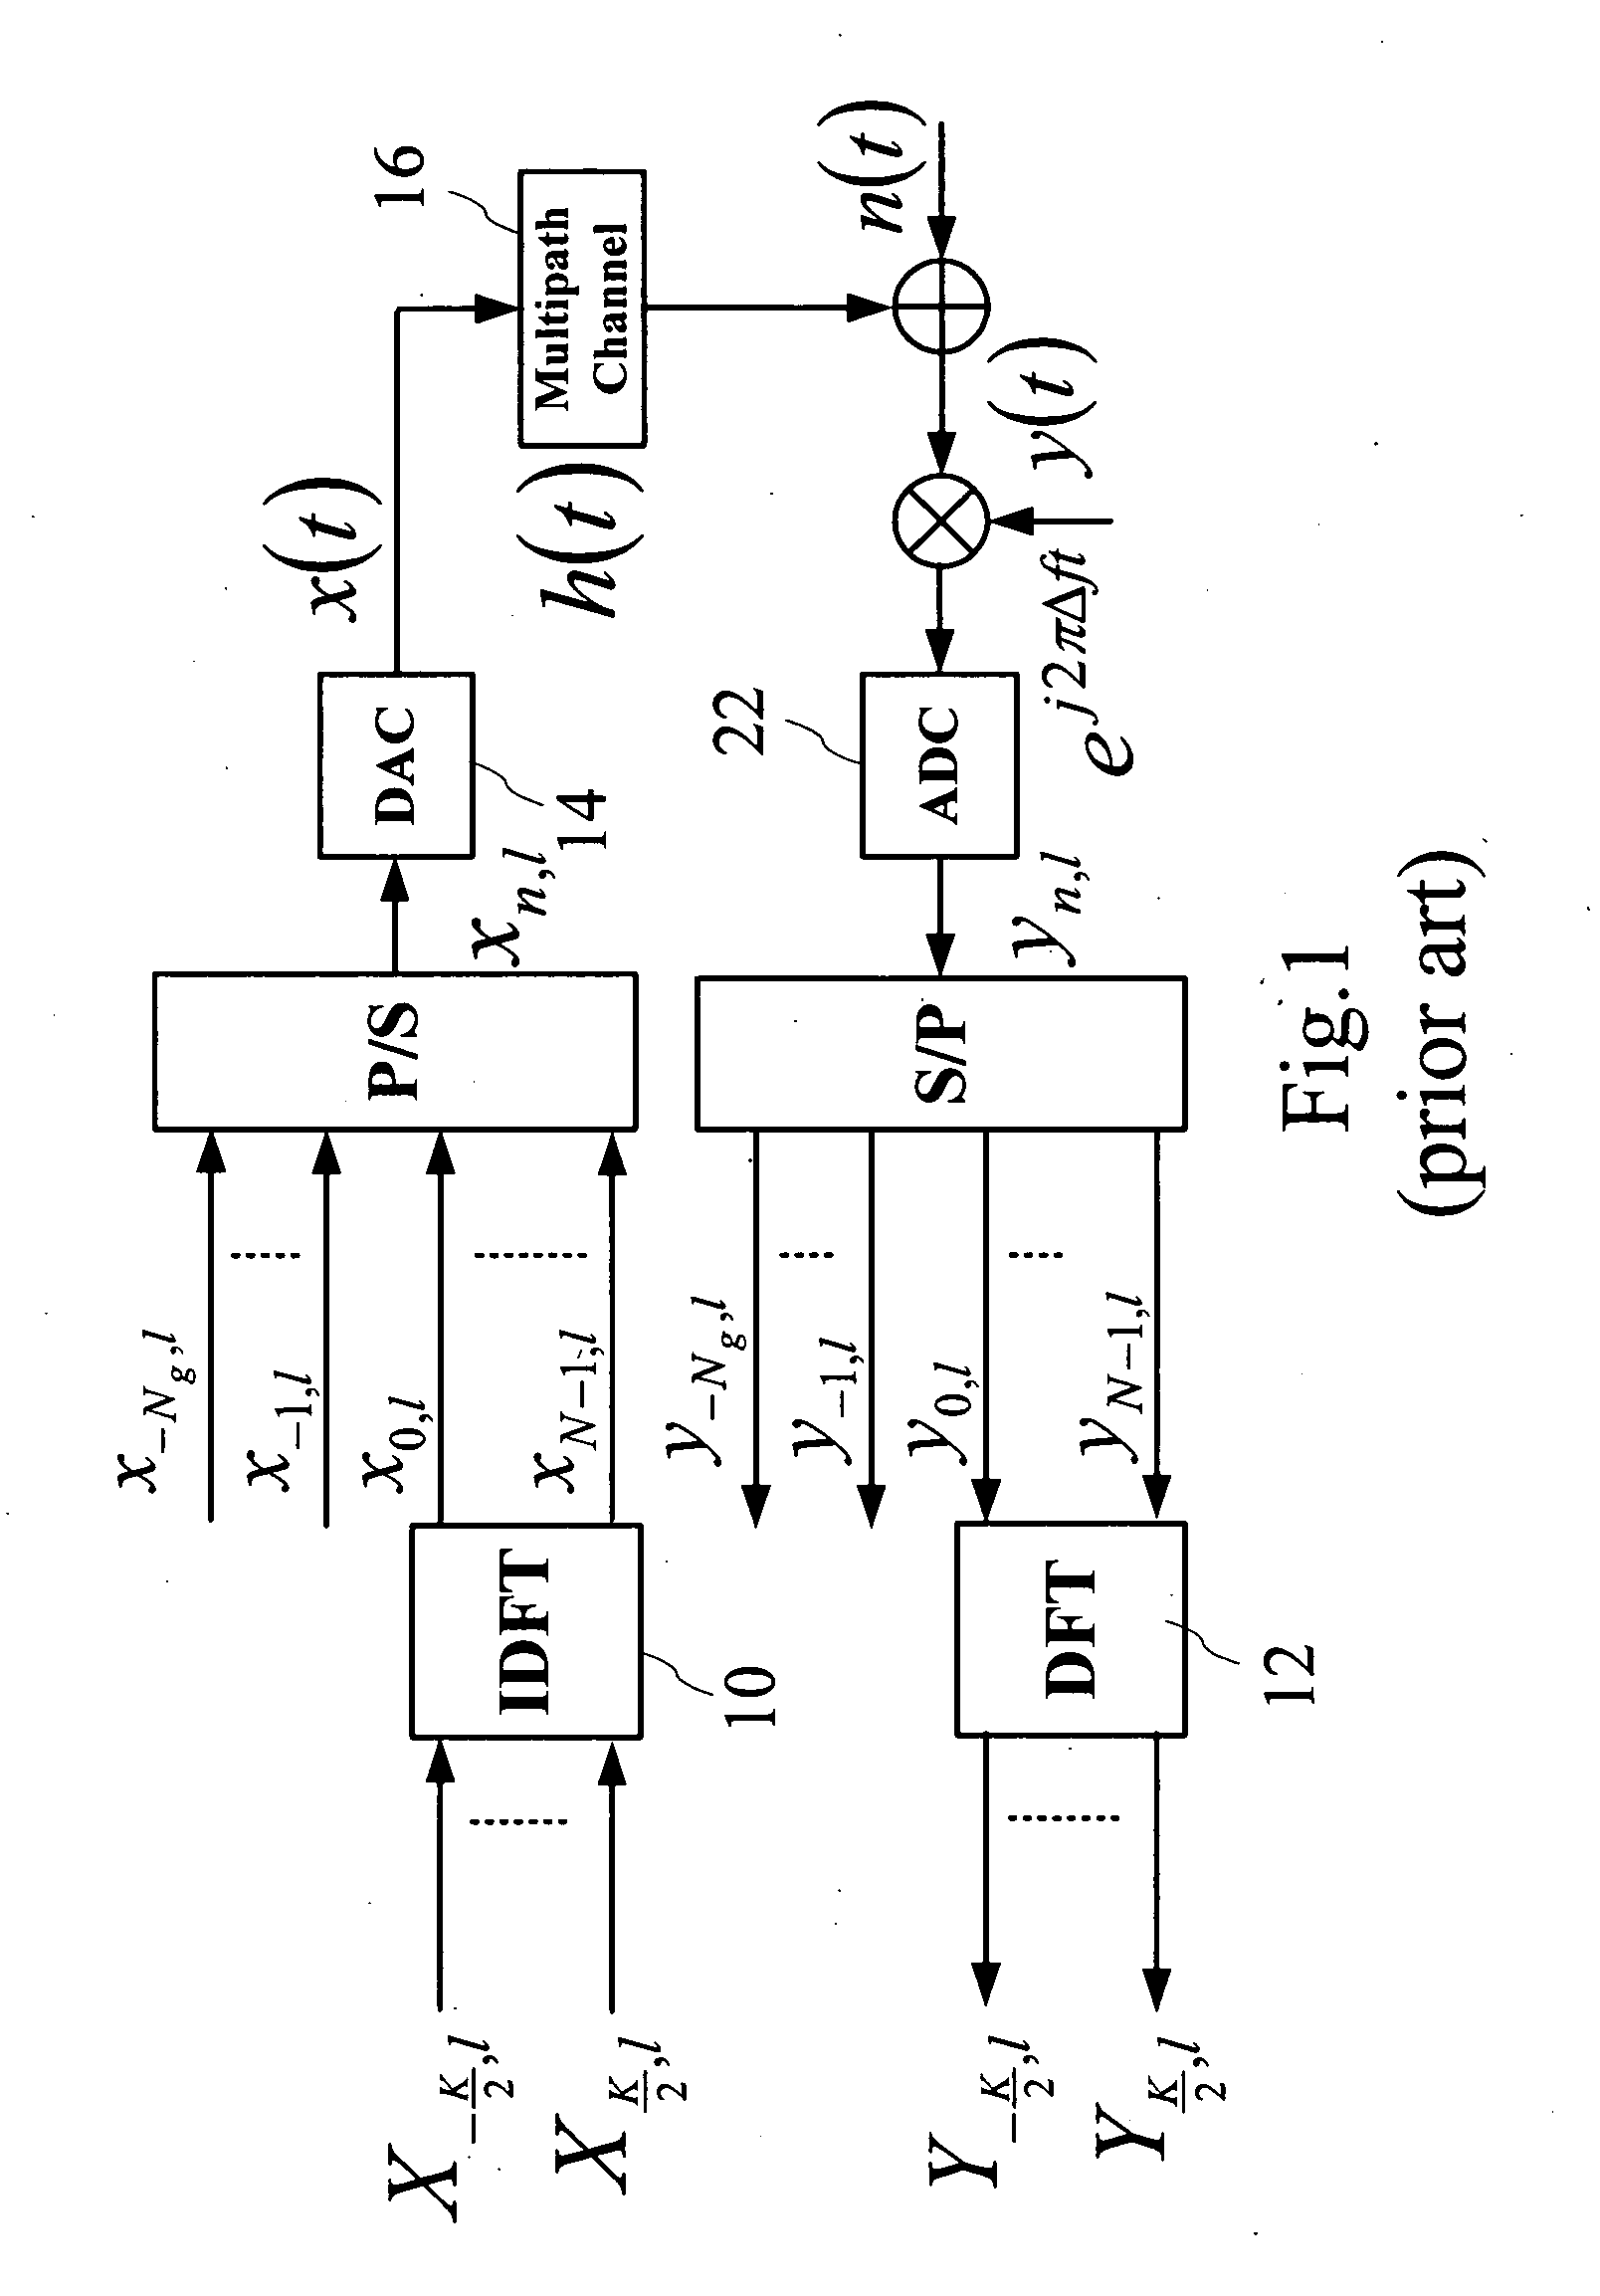 Joint carrier synchronization and channel equalization method for OFDM systems